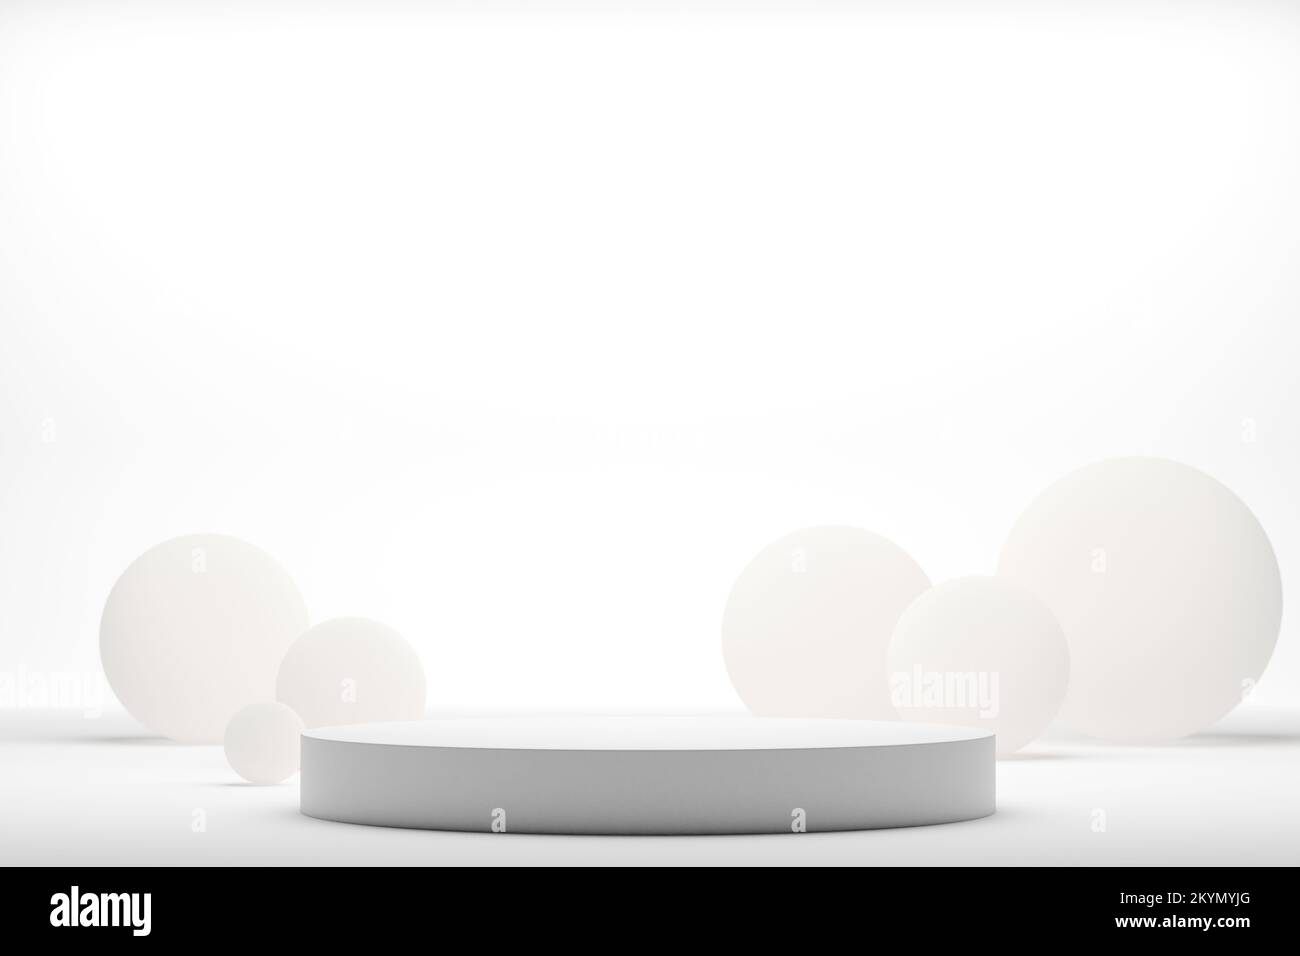 Realistic 3d rendering white platform for product display with spheres. Stock Photo